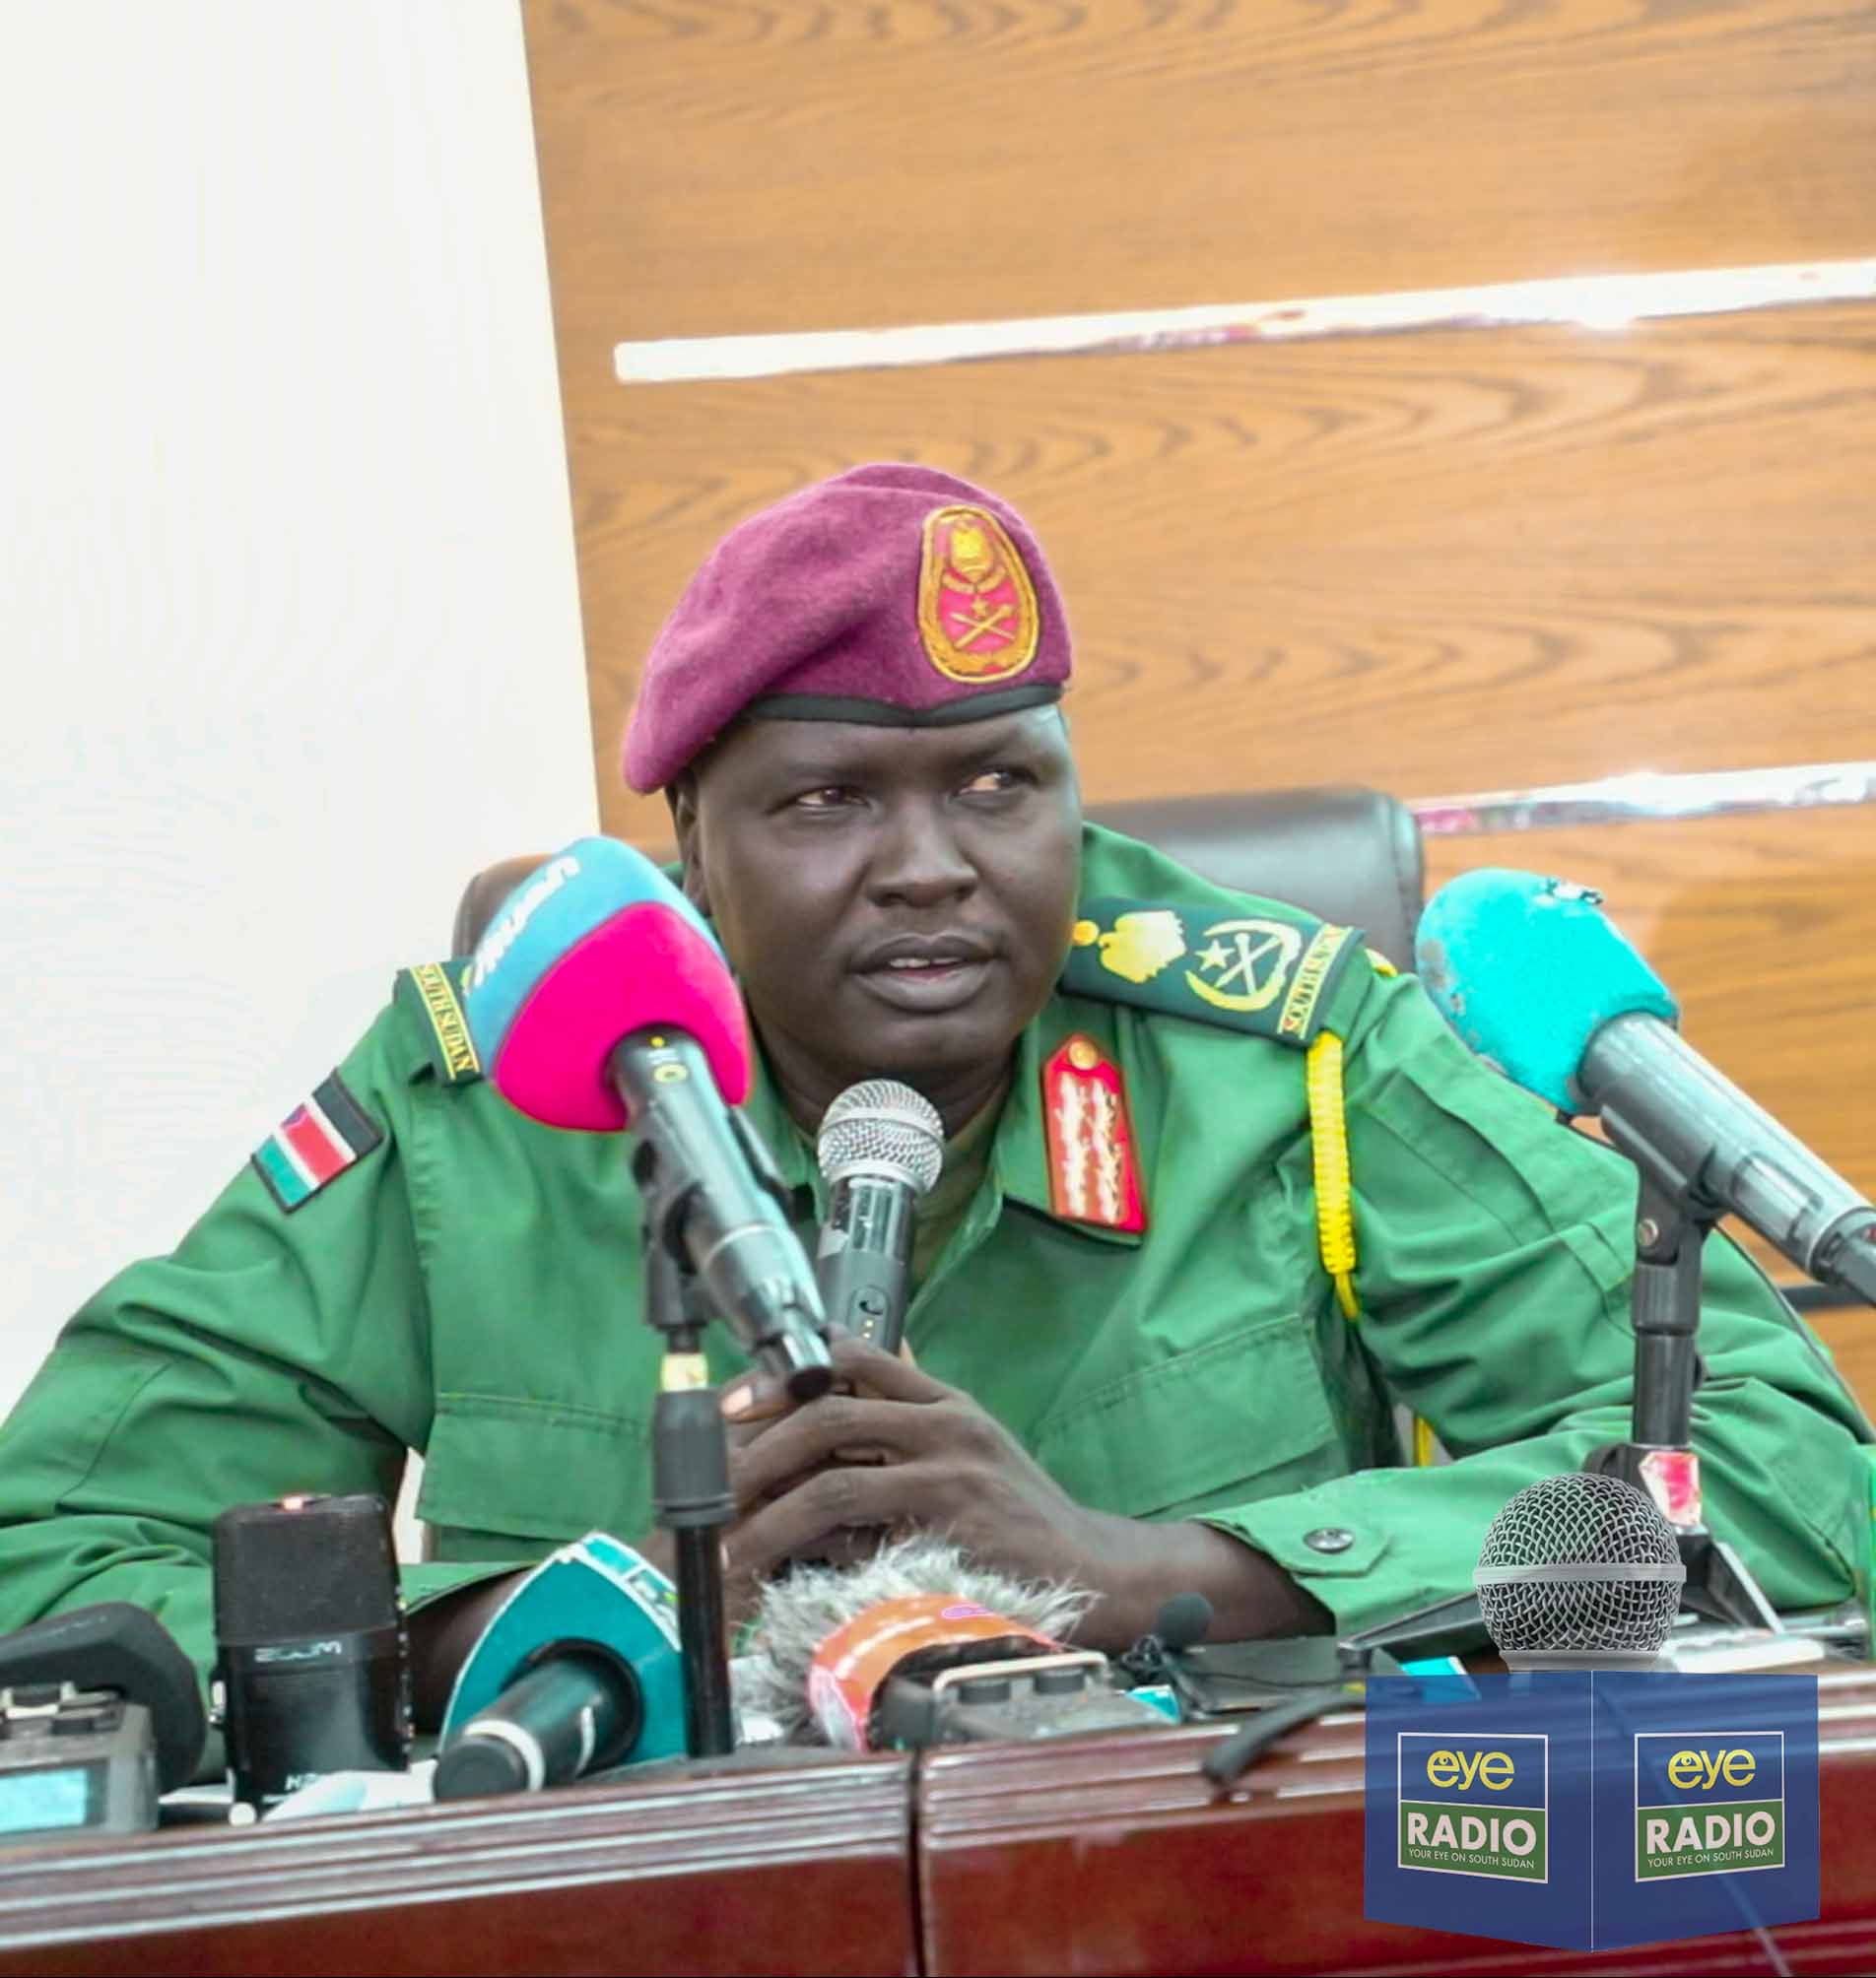 Organized forces cautioned against loyalty to political parties